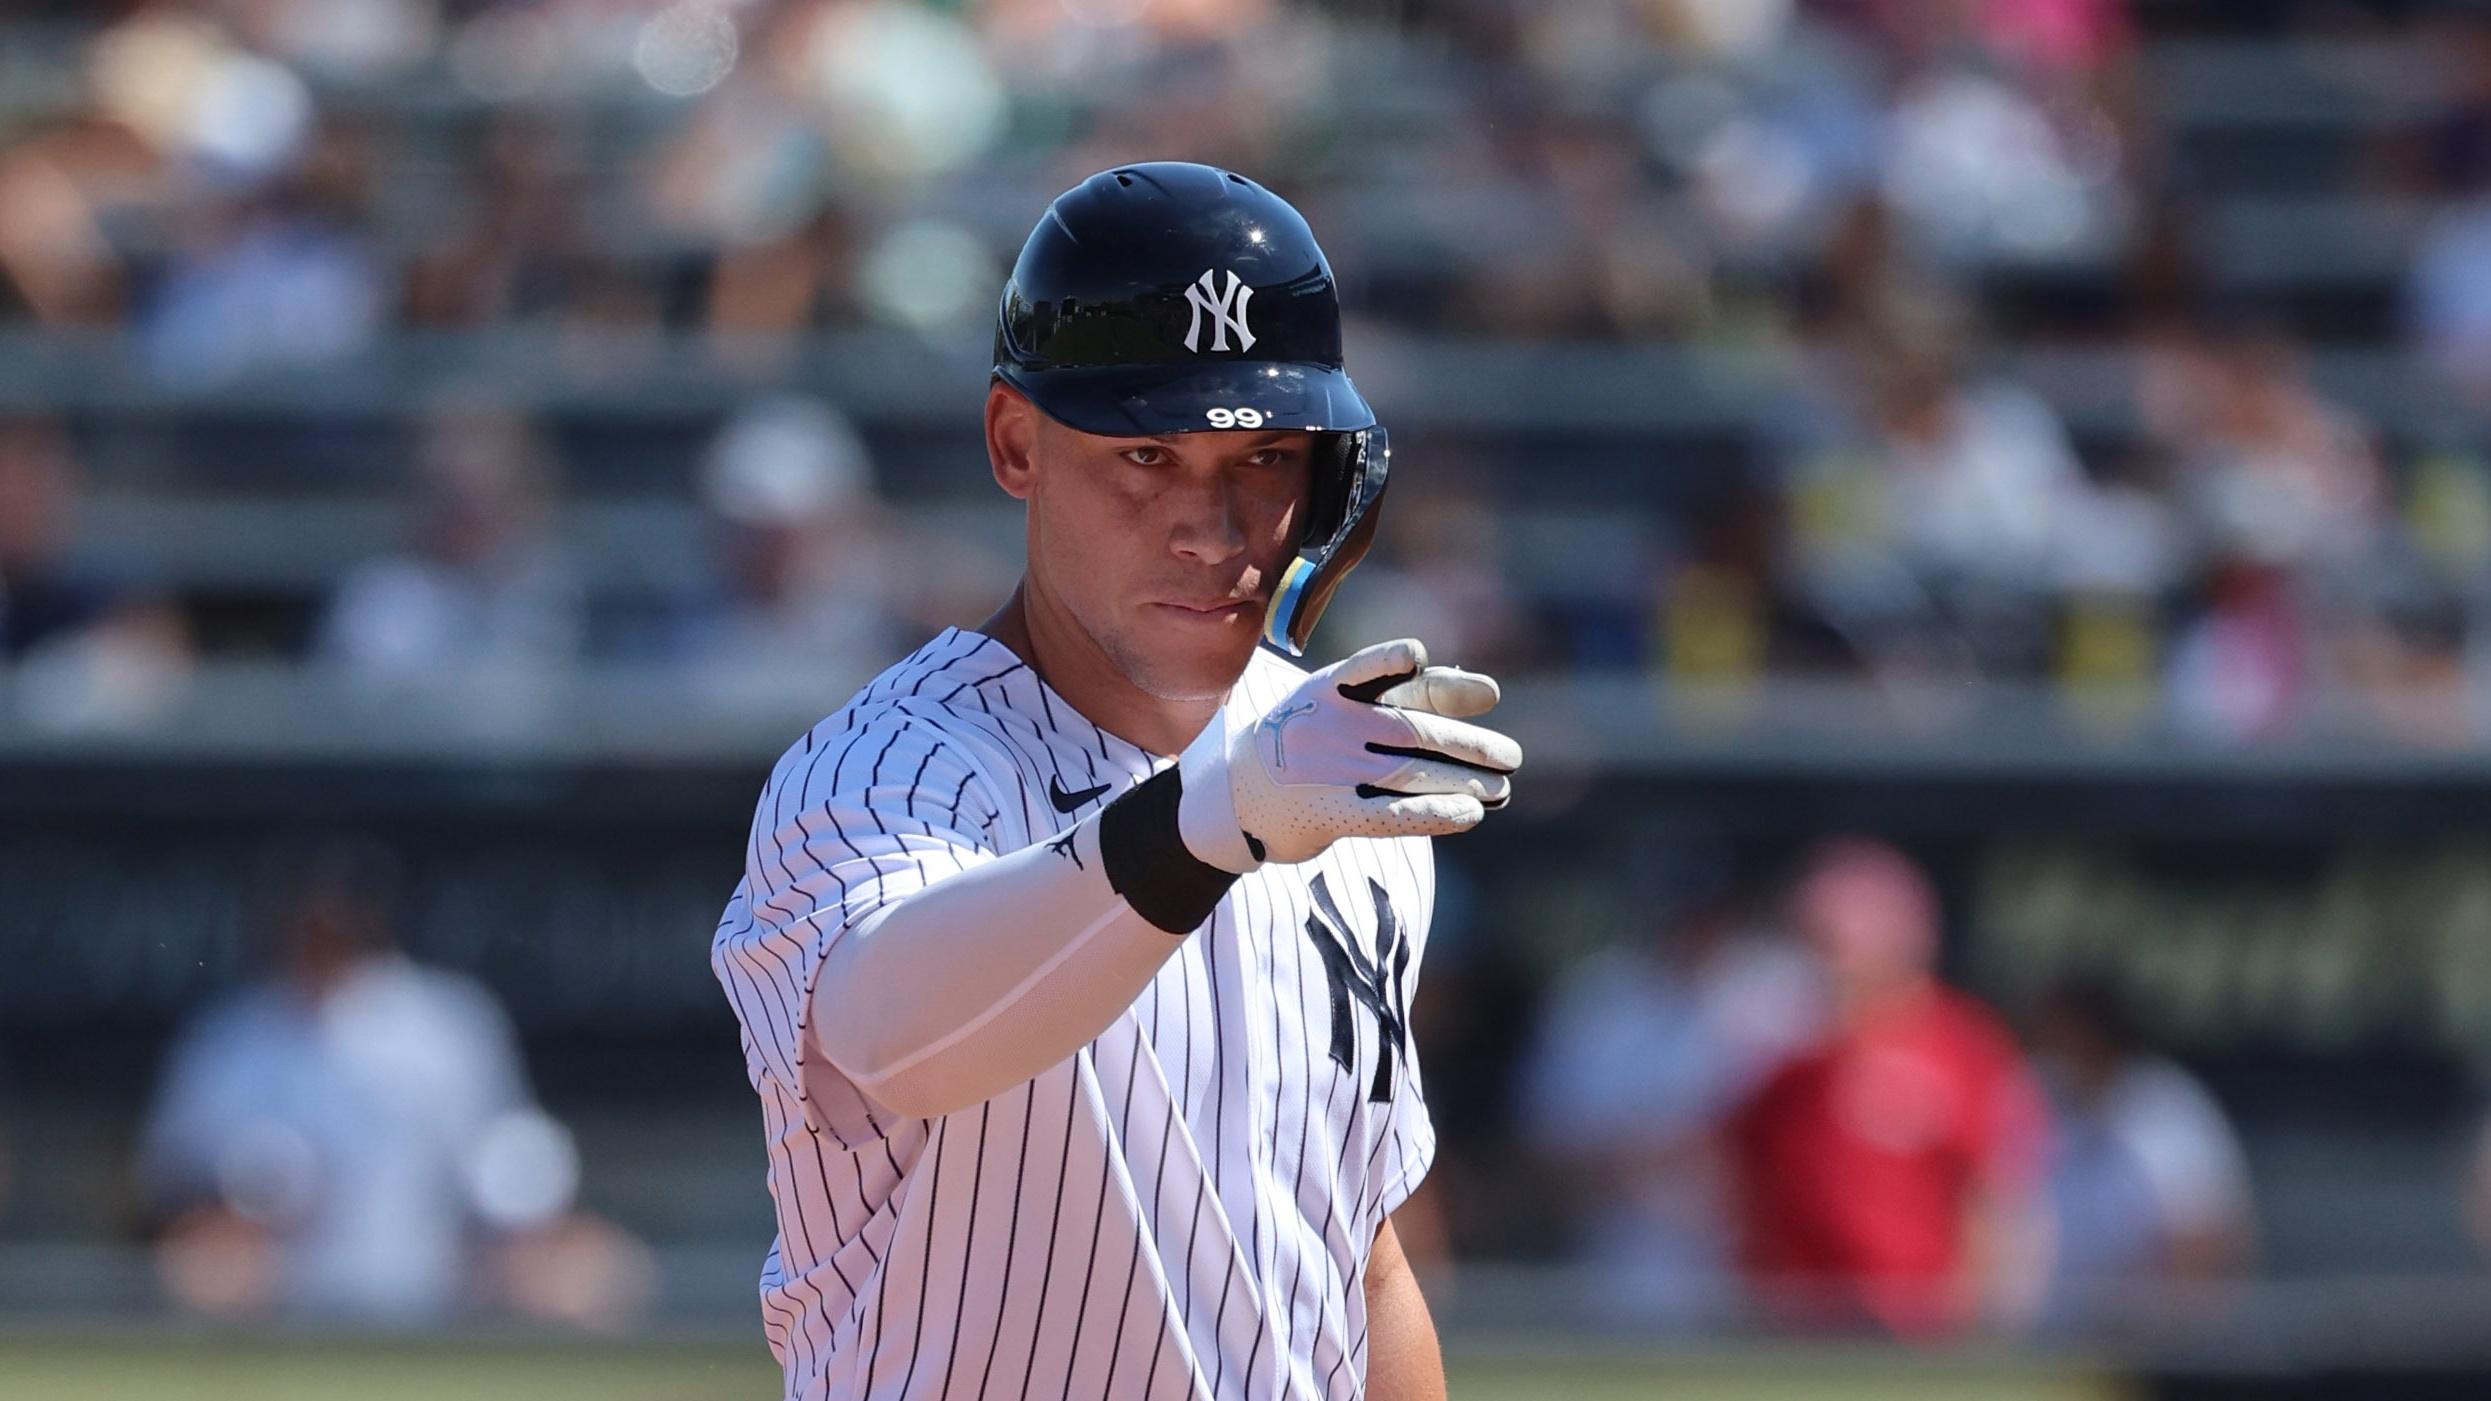 Feb 26, 2023; Tampa, Florida, USA; New York Yankees center fielder Aaron Judge (99) points during the first inning against the Atlanta Braves at George M. Steinbrenner Field. Mandatory Credit: Kim Klement-USA TODAY Sports / © Kim Klement-USA TODAY Sports